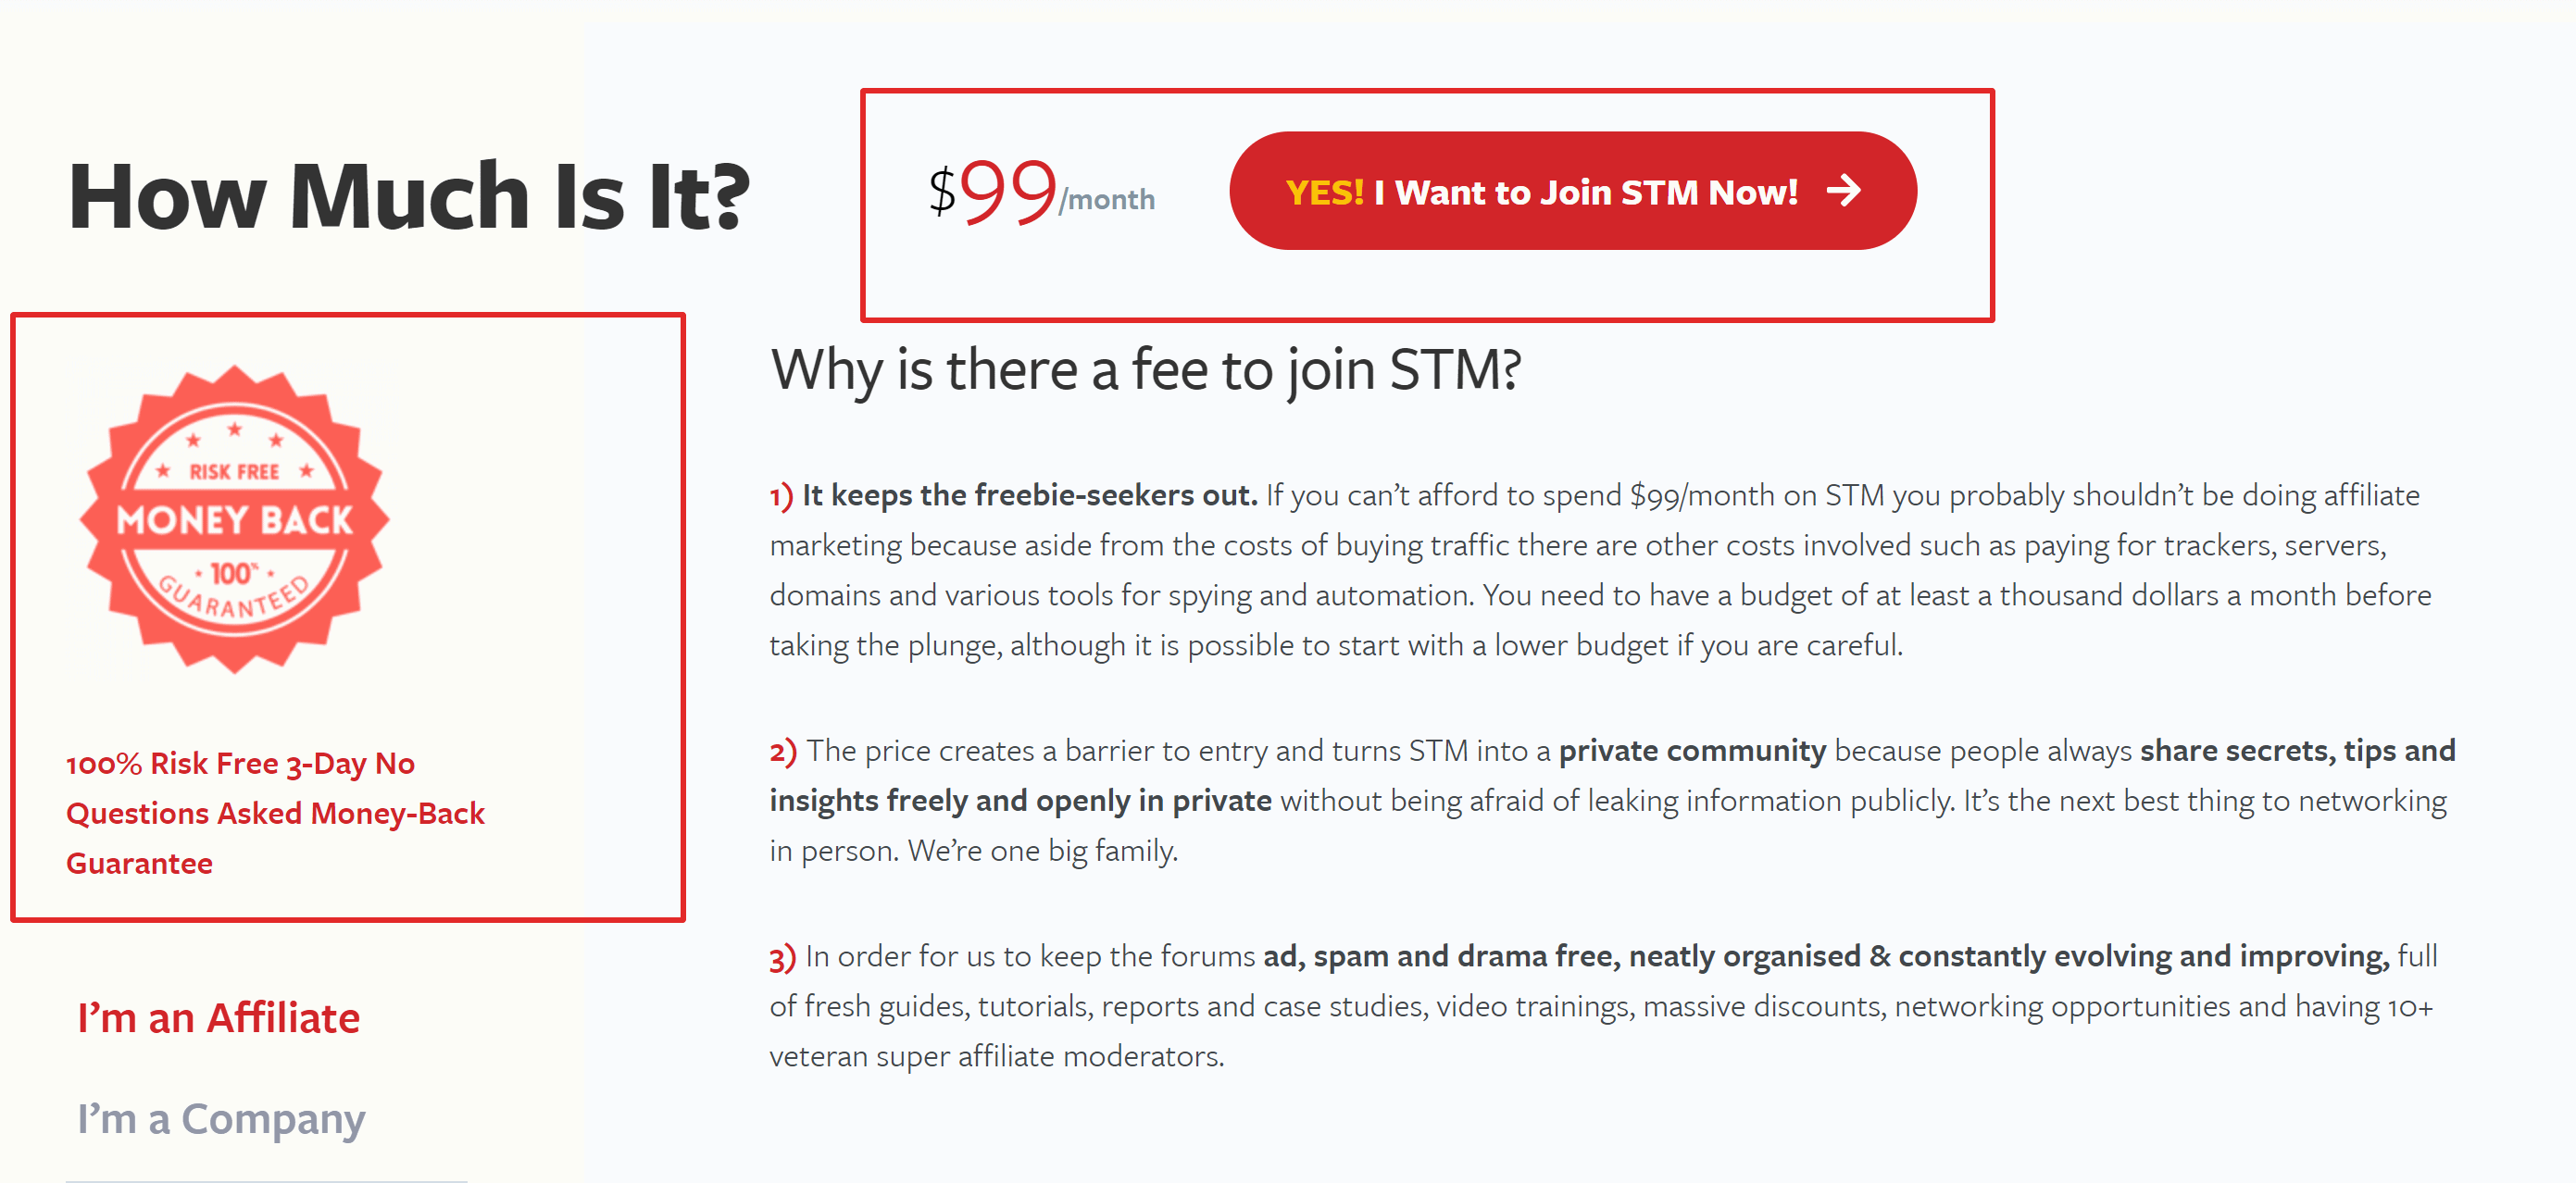 STm Forum Pricing options